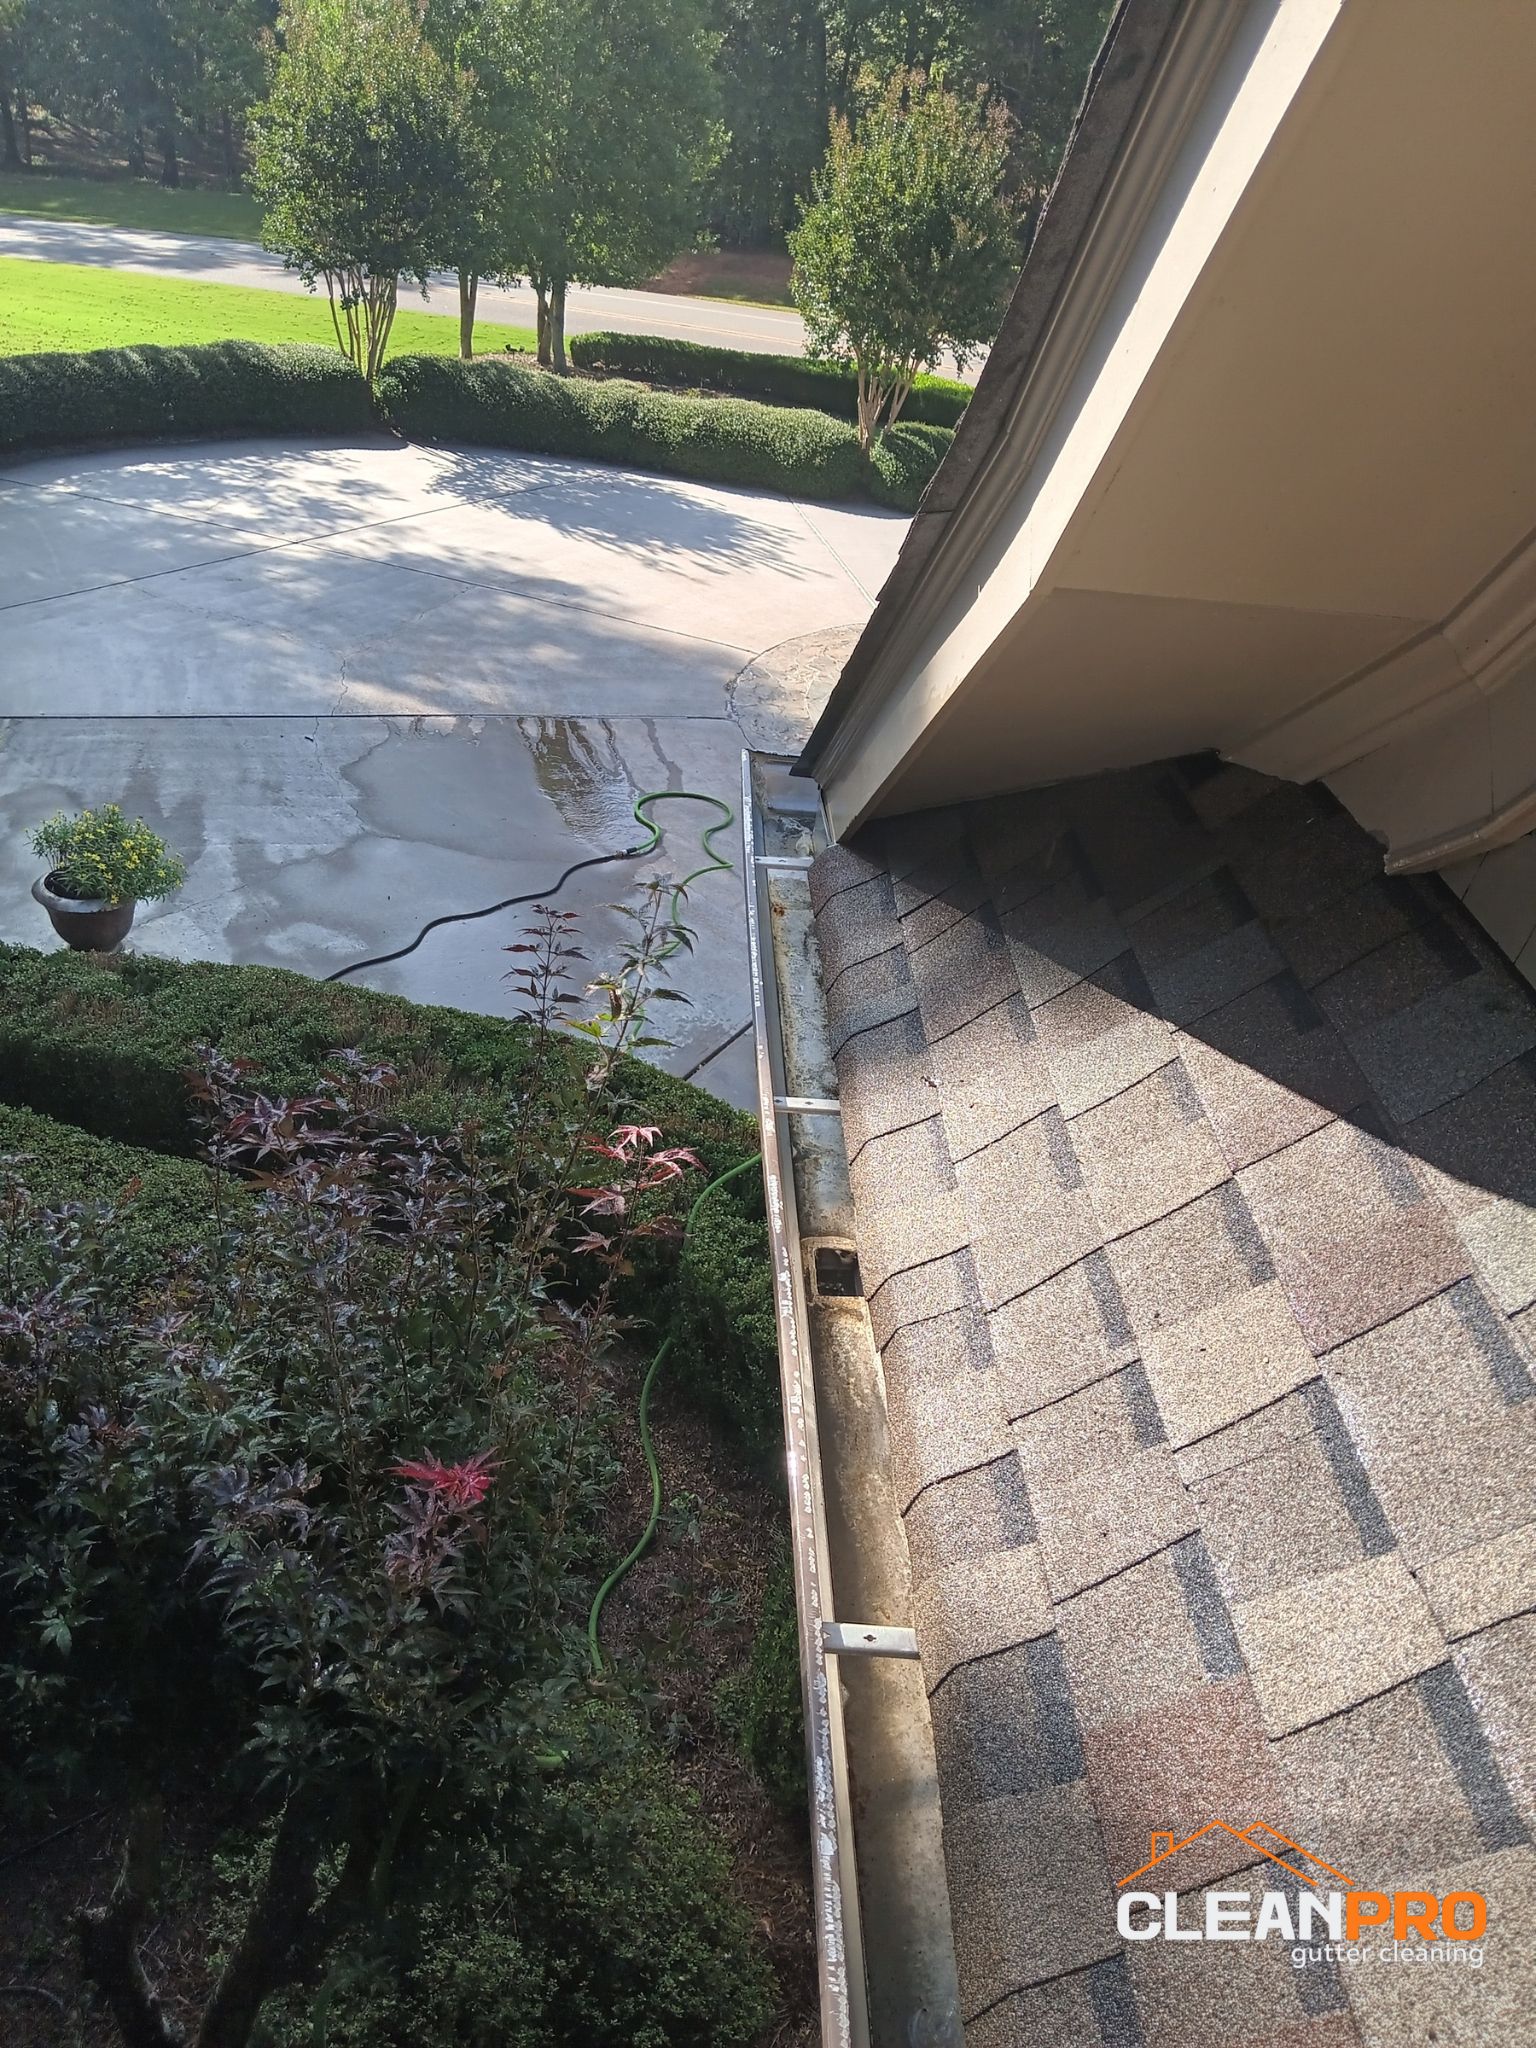 Quality Gutter Cleaning in Staten Island NY